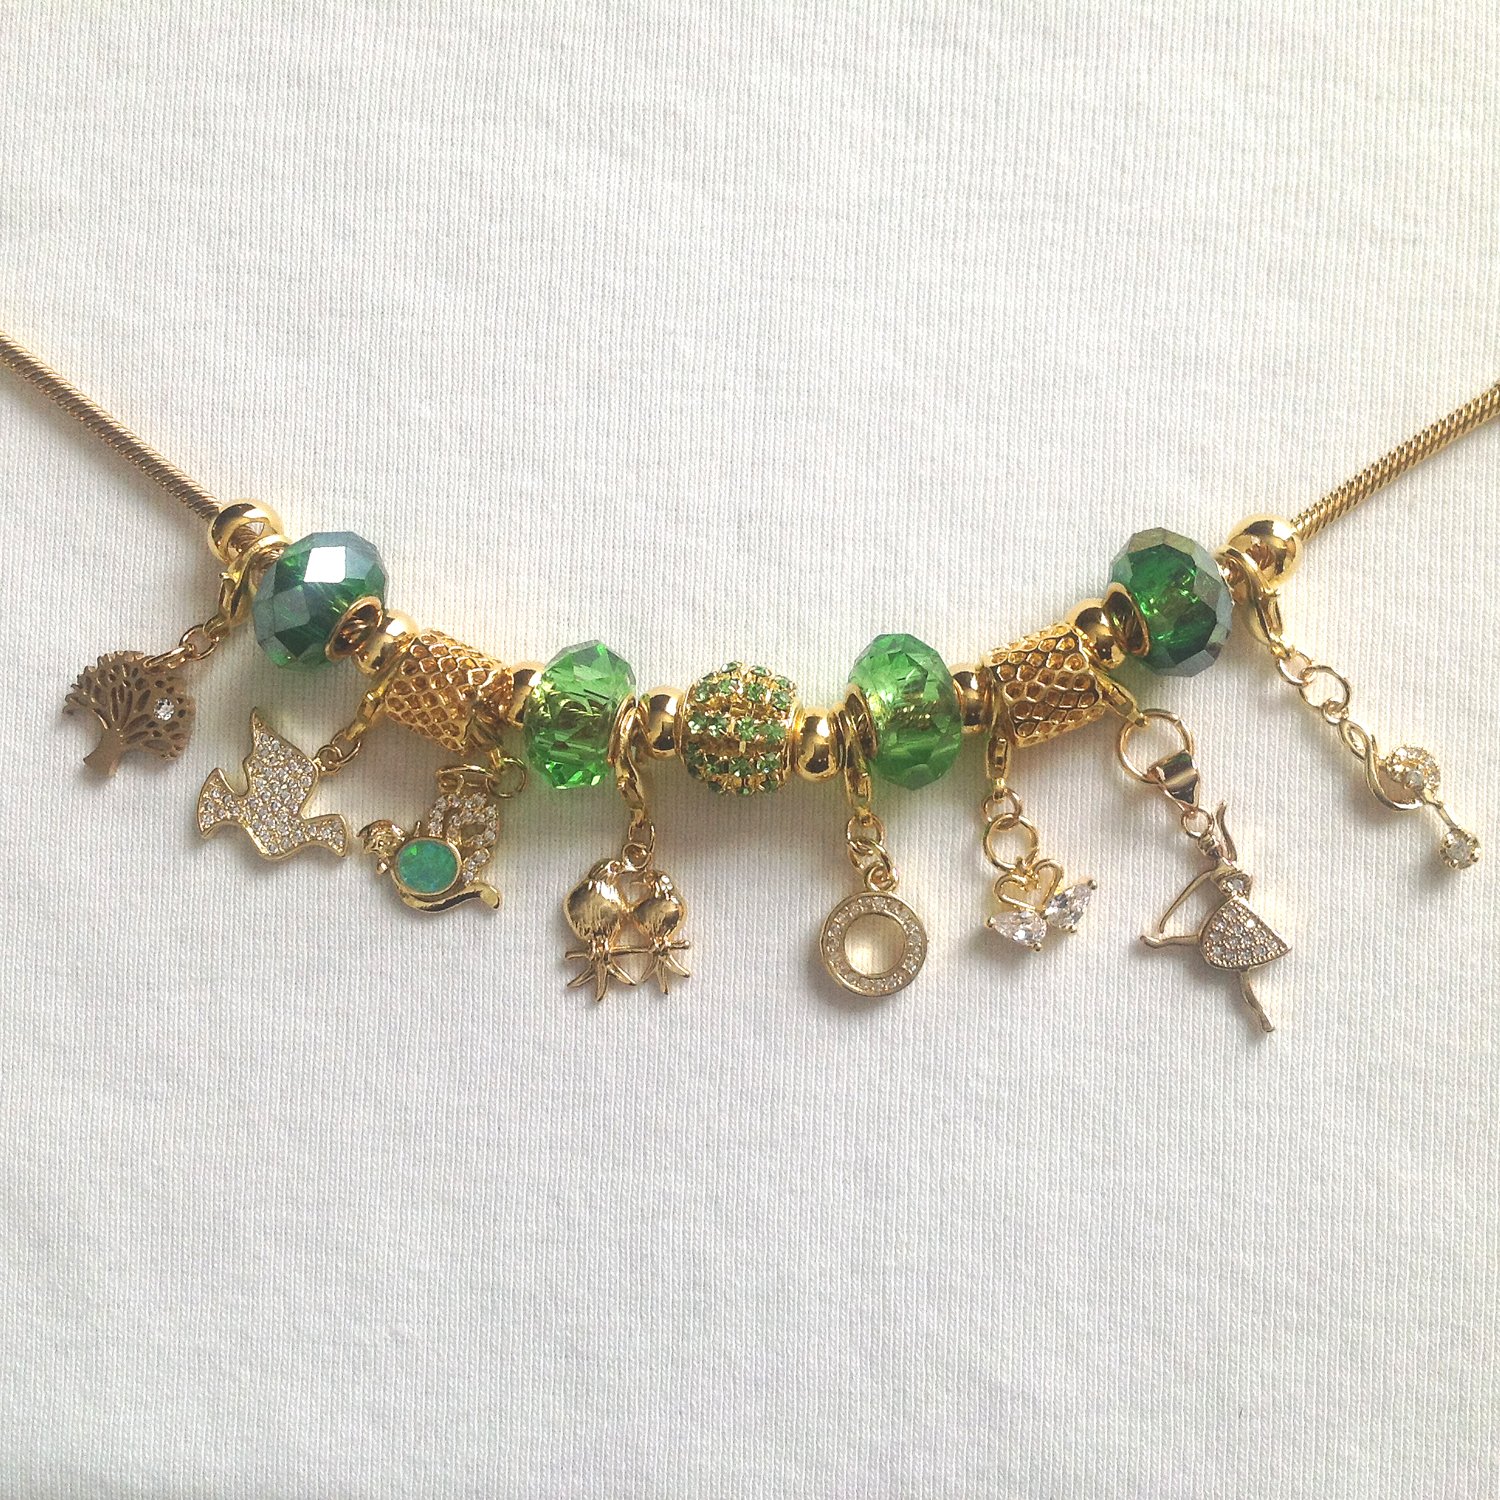 Days of Christmas Cubic Zirconia European Style Charm Bracelet in Gold, Green and White